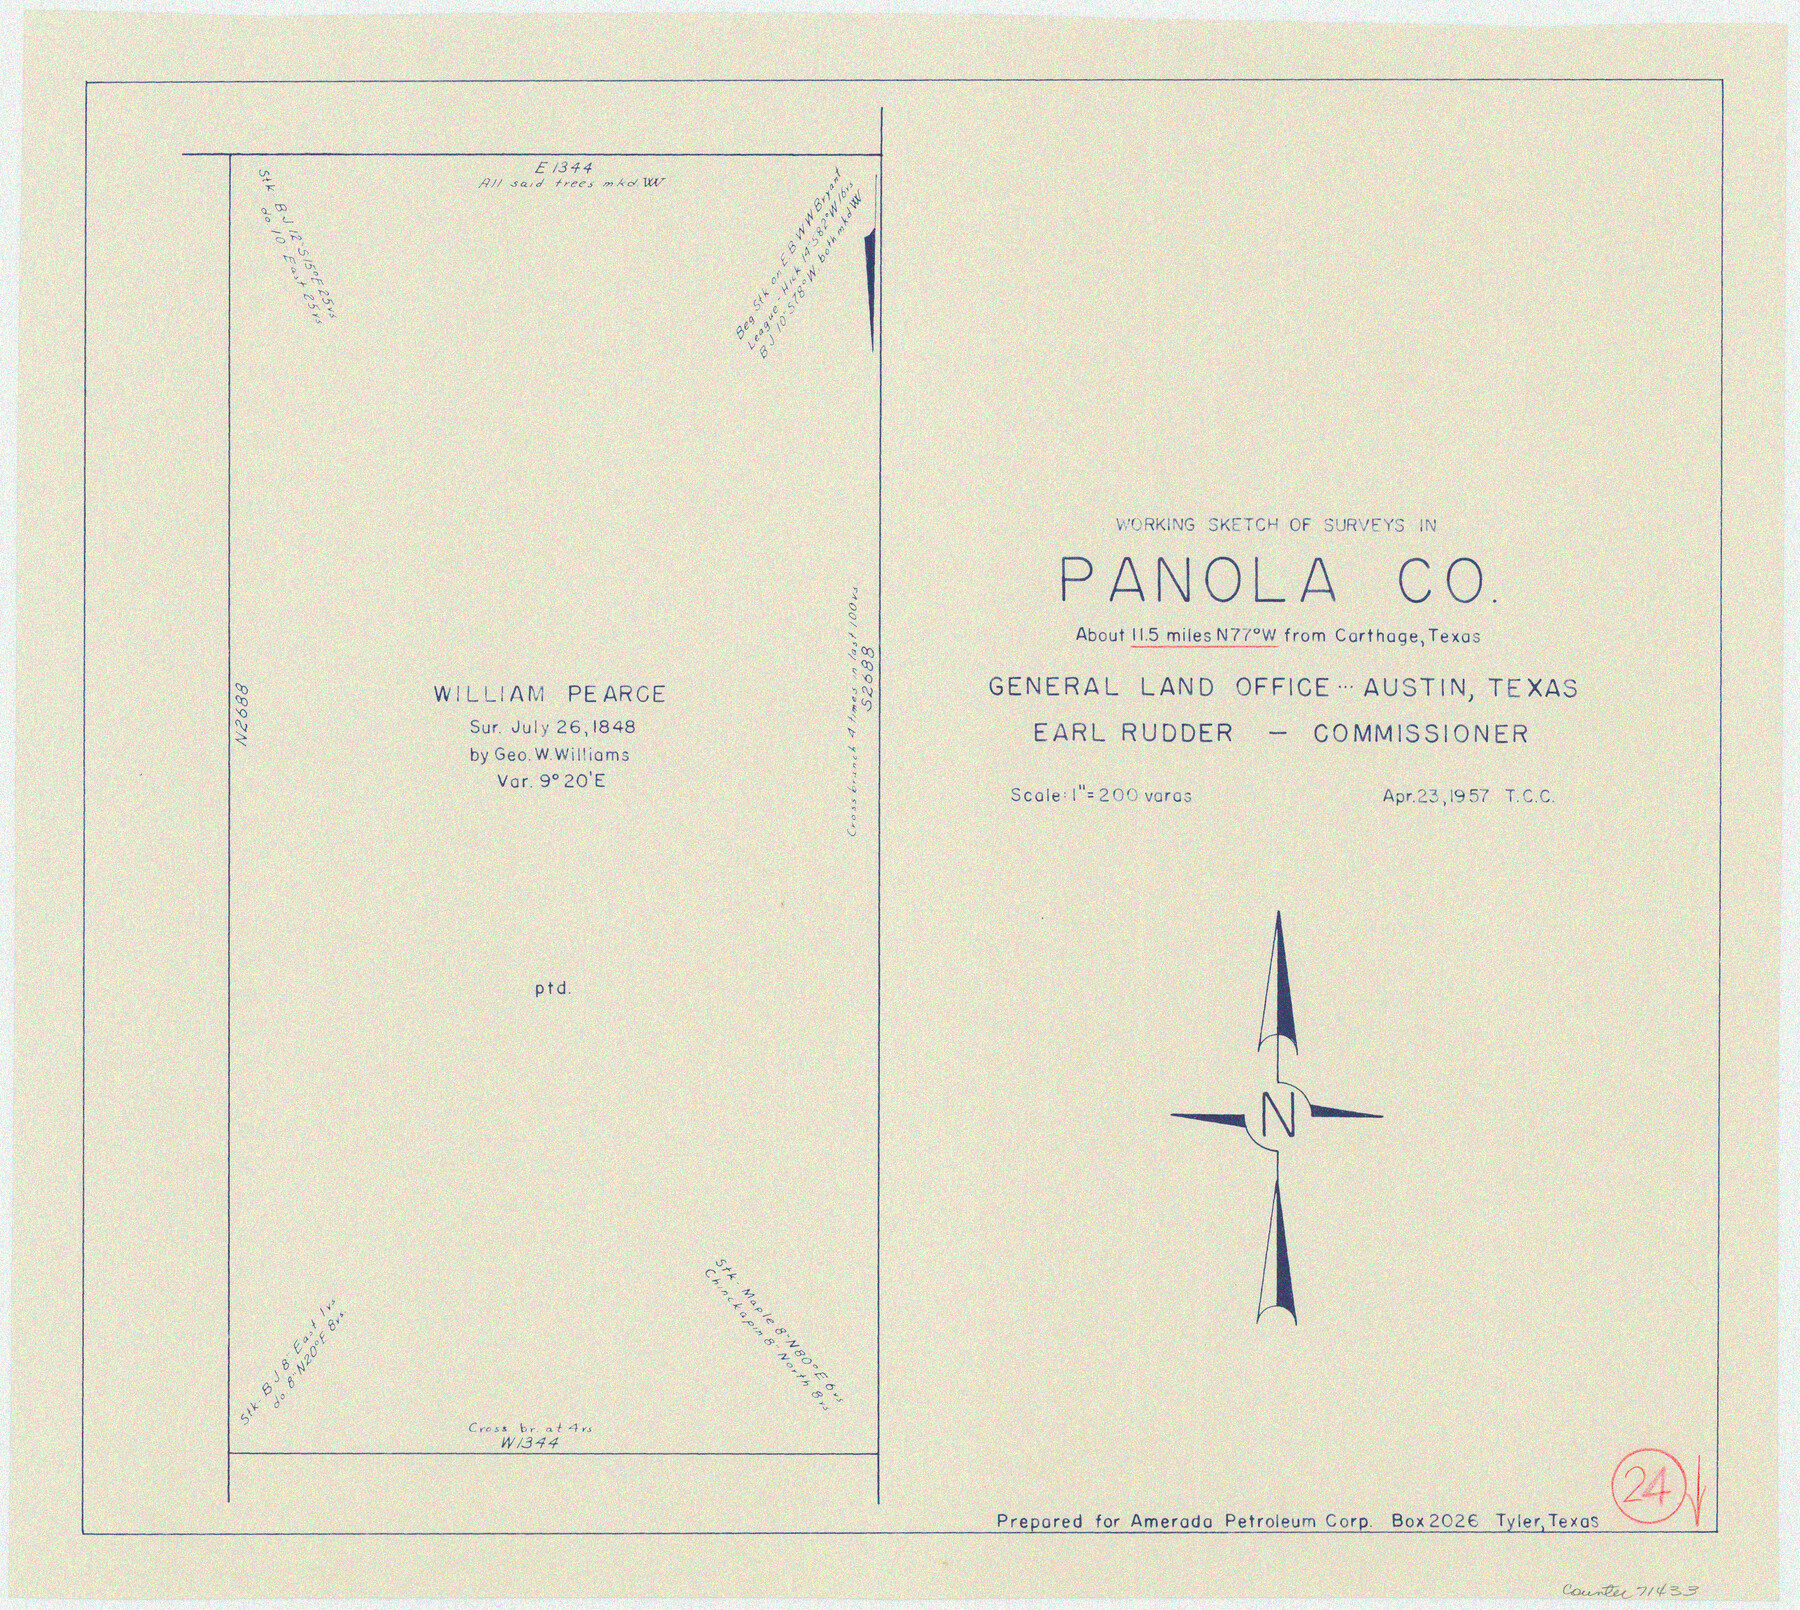 71433, Panola County Working Sketch 24, General Map Collection